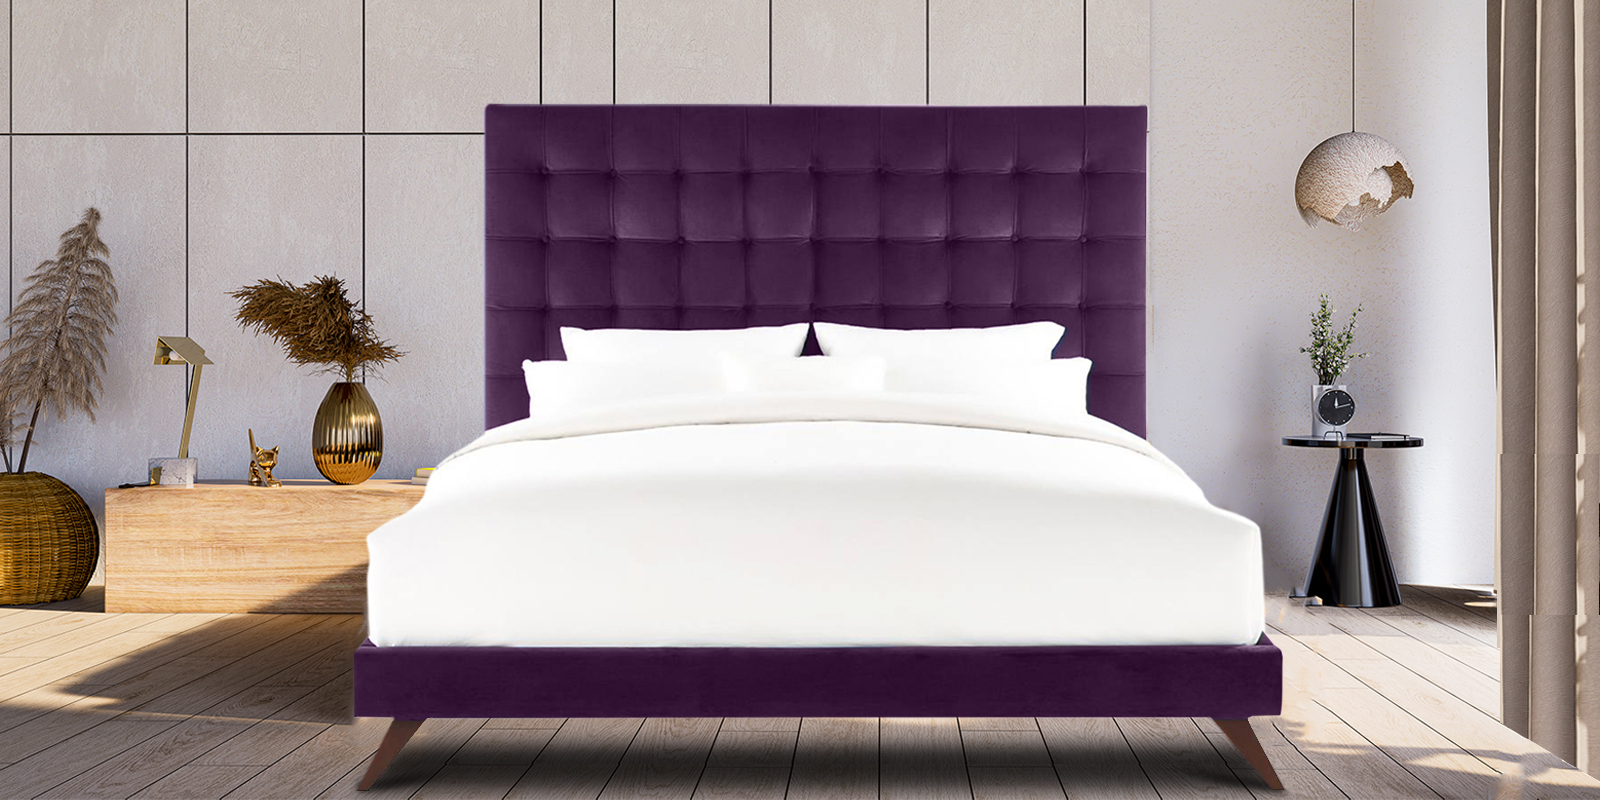 Glorious Queen Size Upholstered Bed in Purple Colour - Dreamzz ...